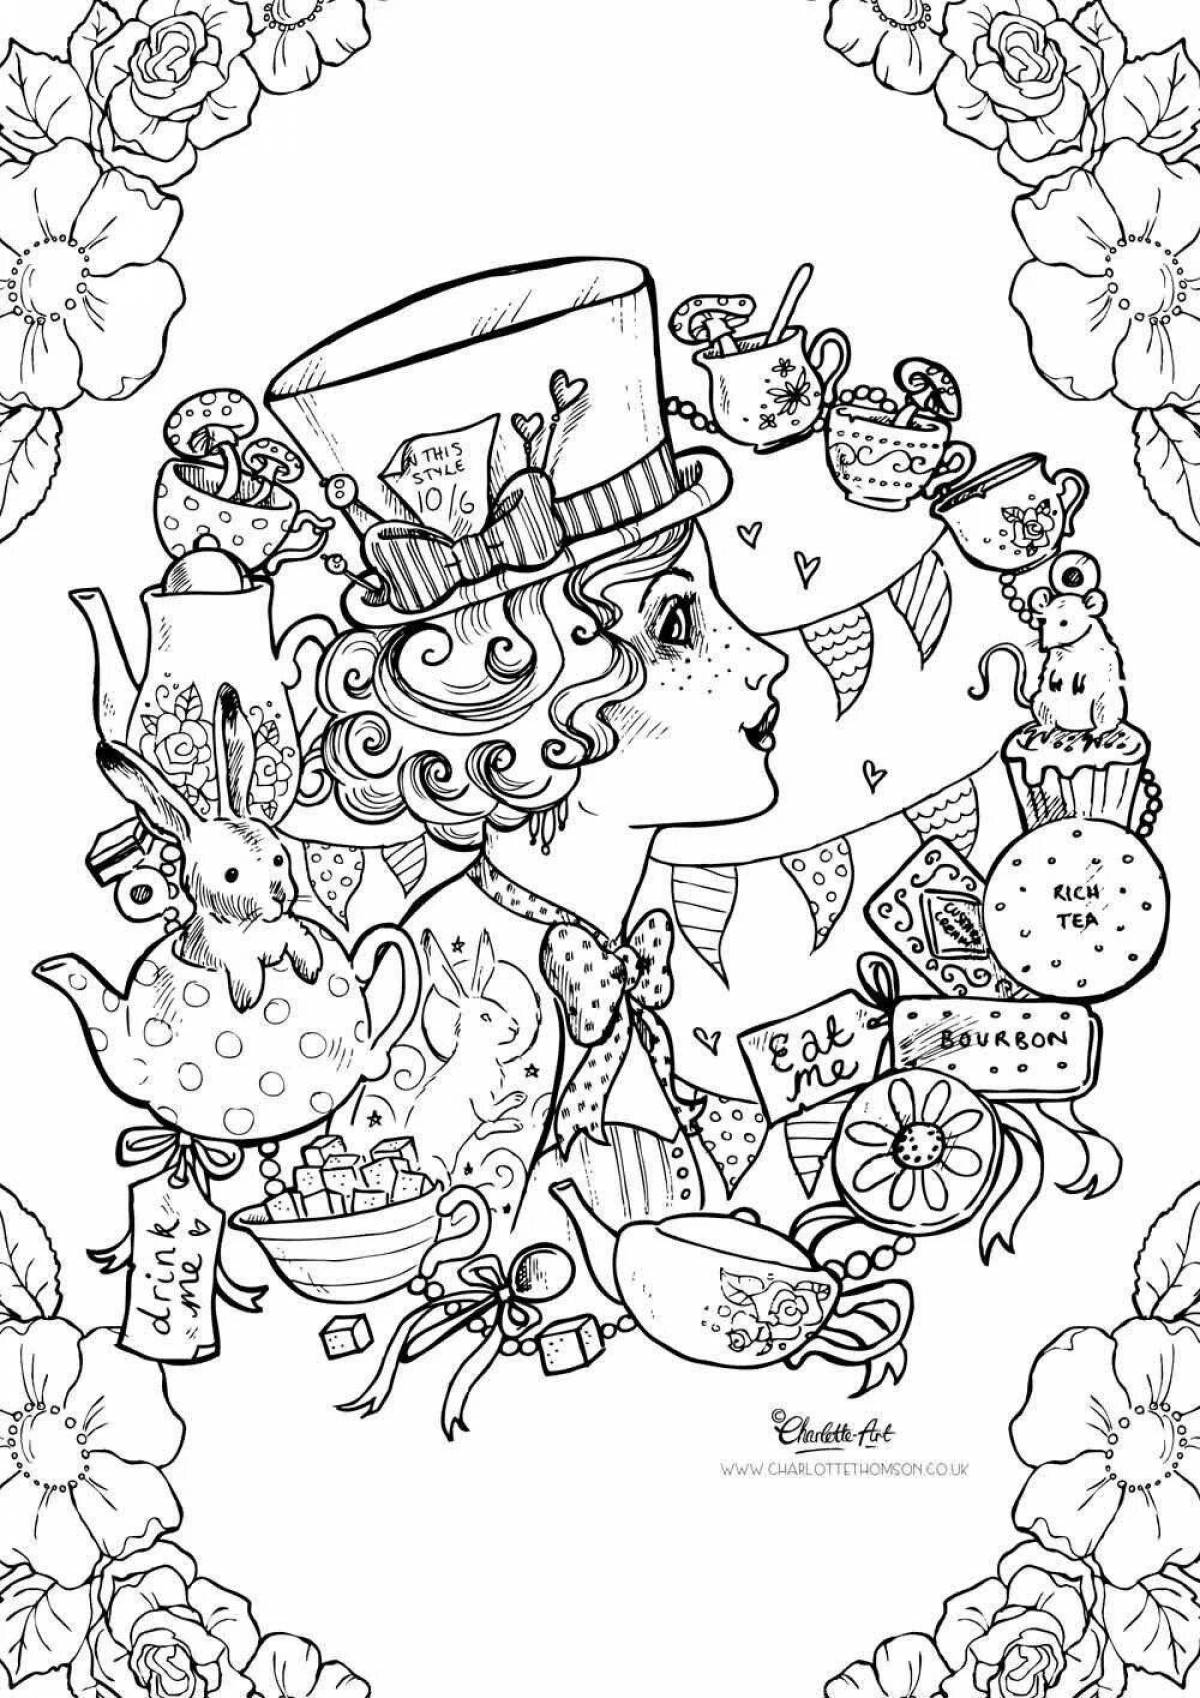 Coloring page the wonderful hatter